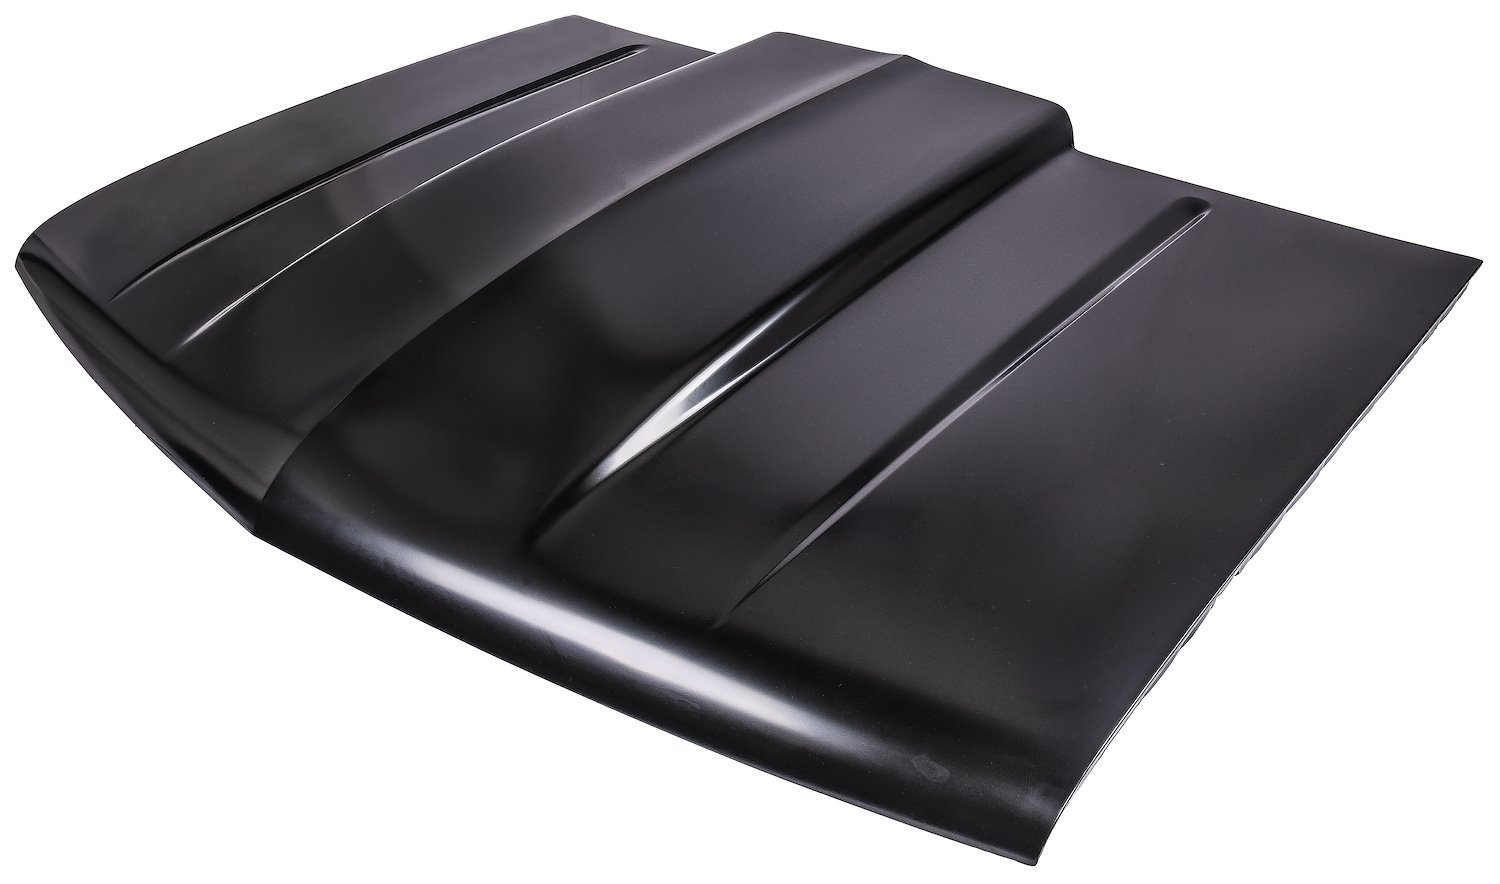 Cowl Induction Hood for 1988-2000 GM Truck [Steel]